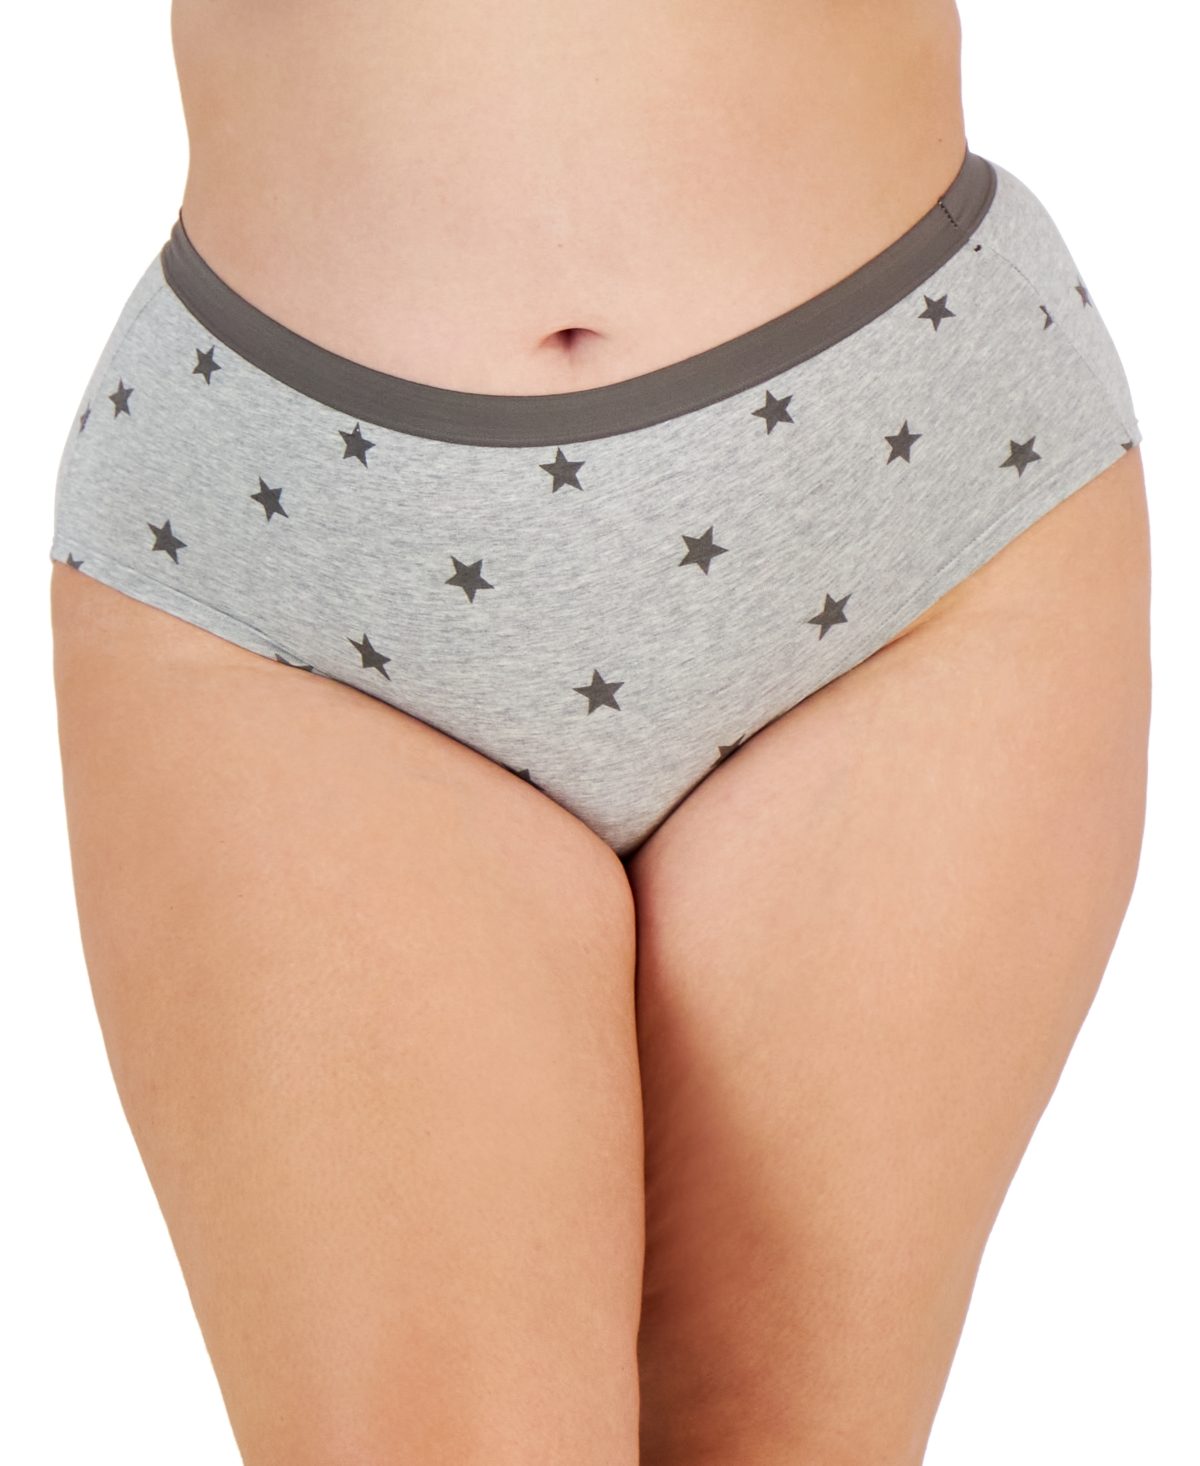 Jenni Plus Size Lace-Trim Hipster Underwear, Created for Macy's